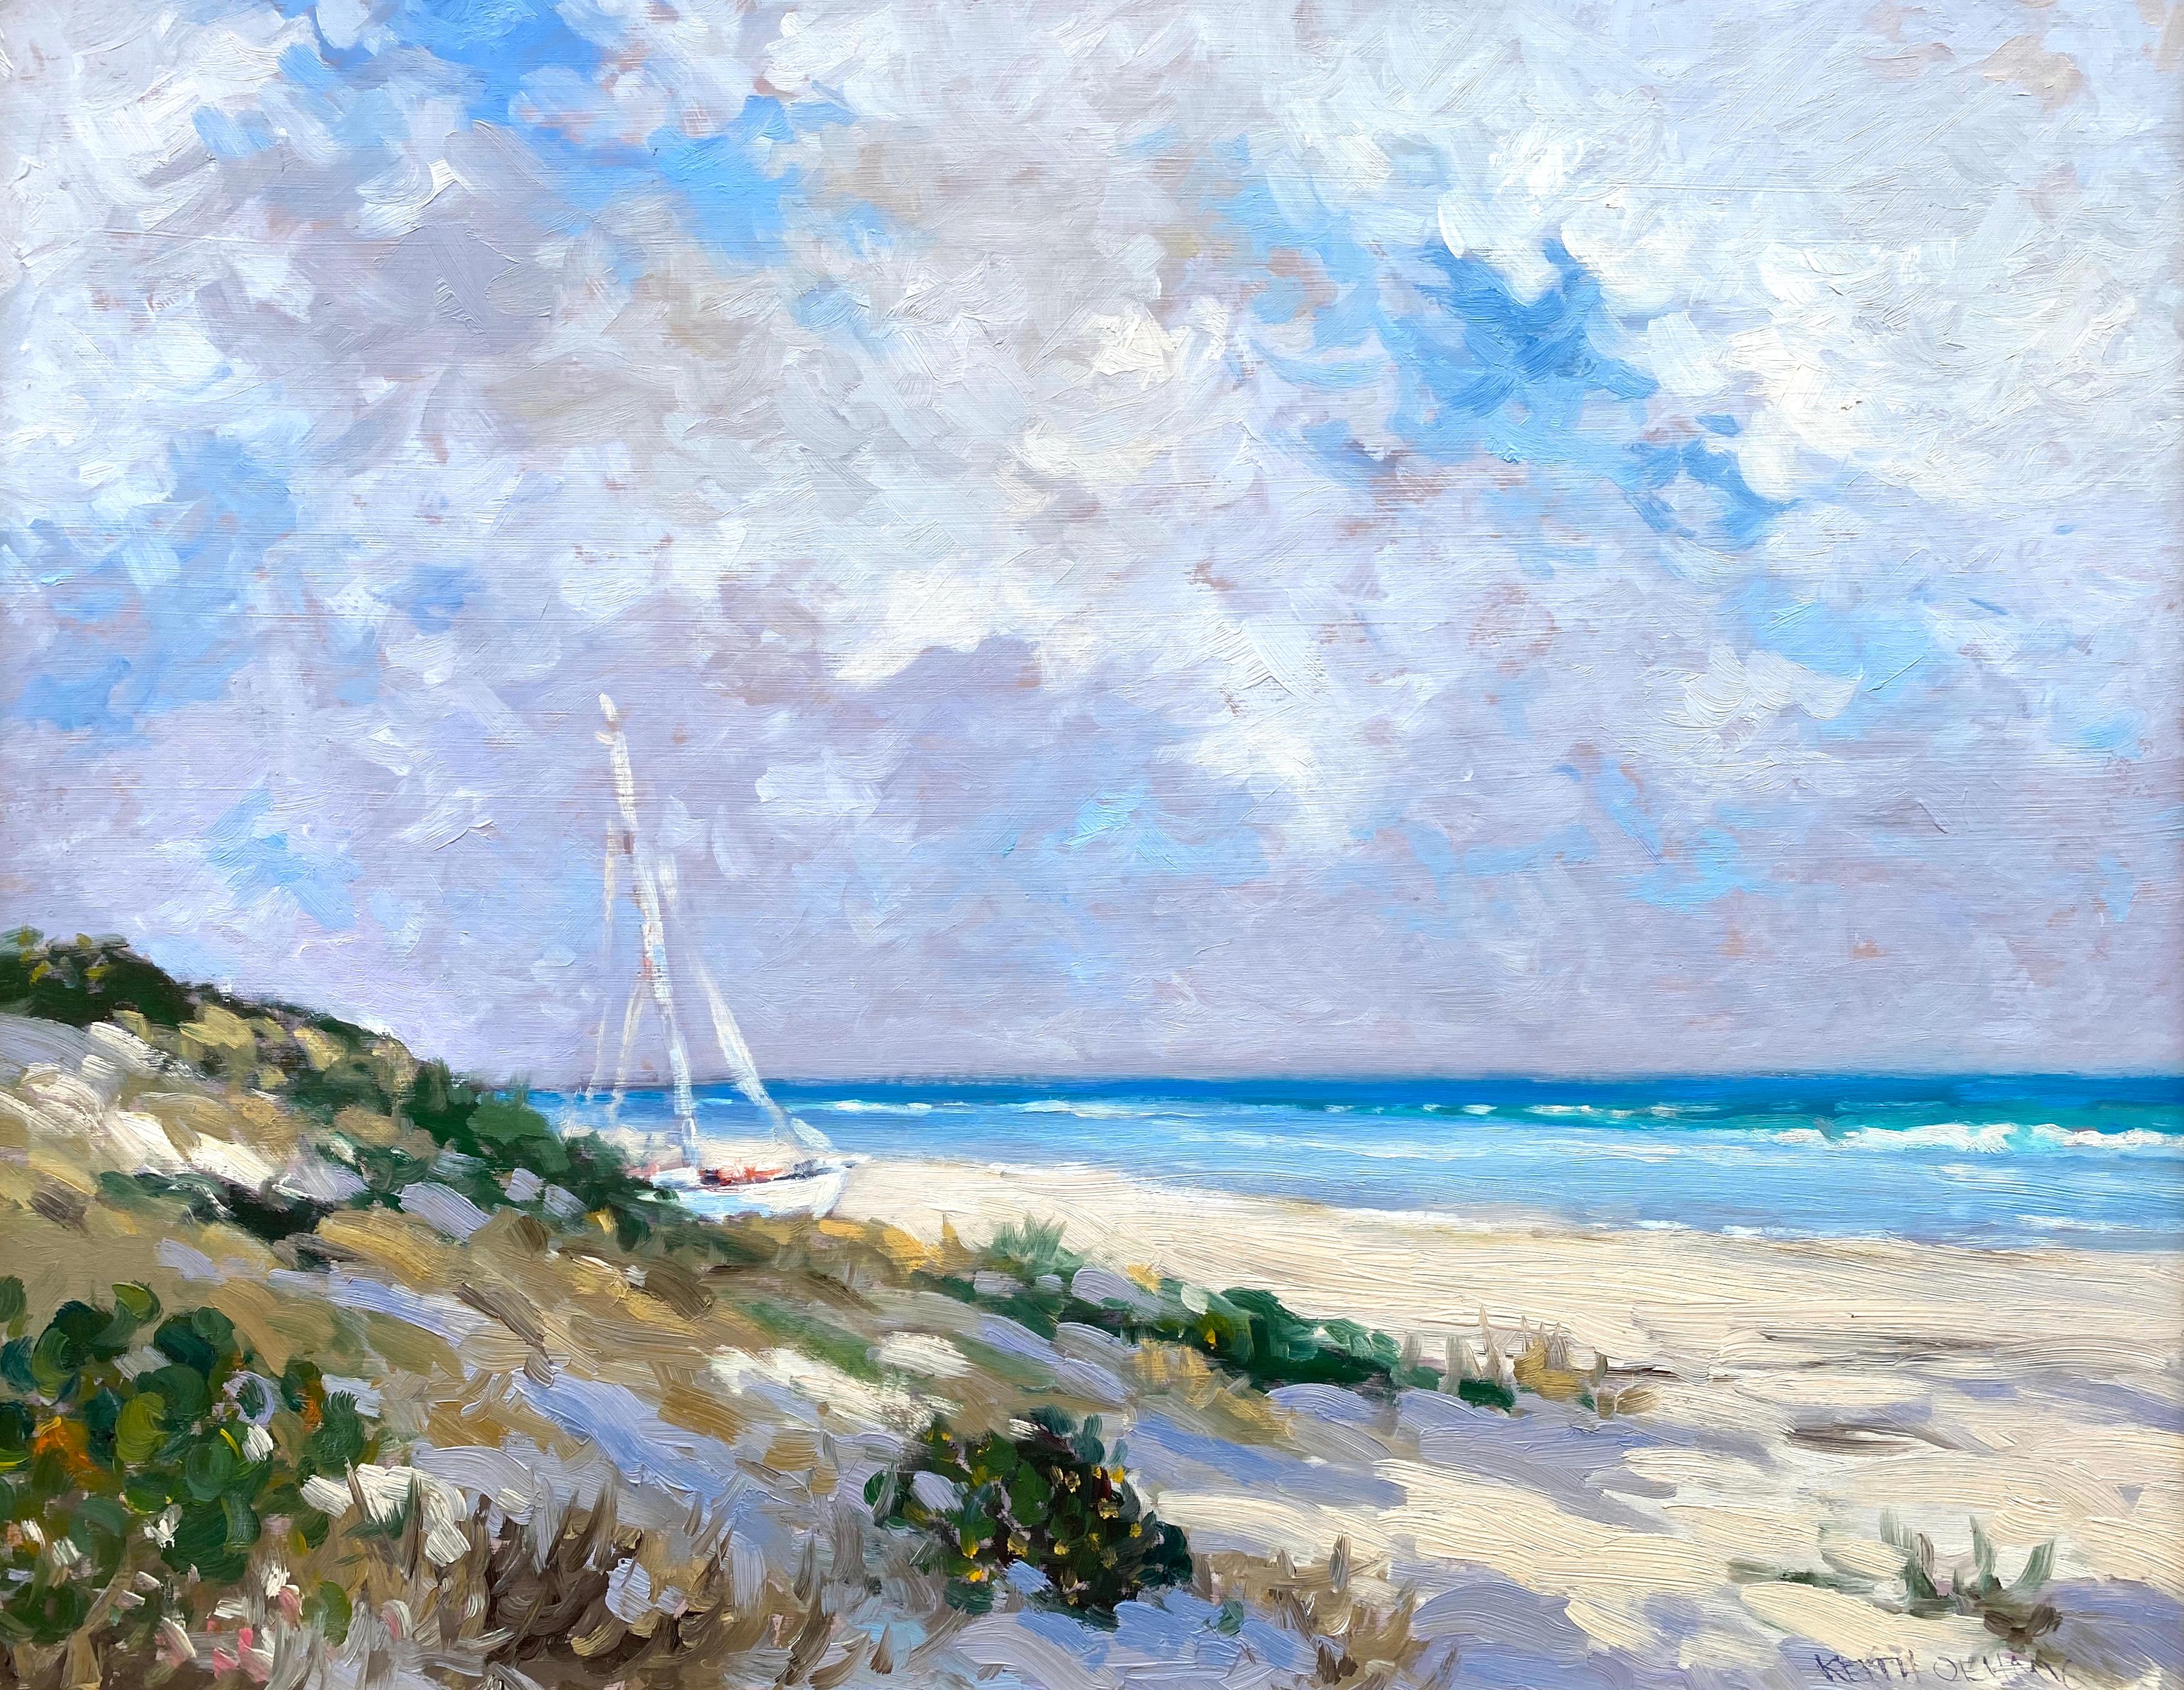 Keith Oehmig Landscape Painting - “Seaside Light”